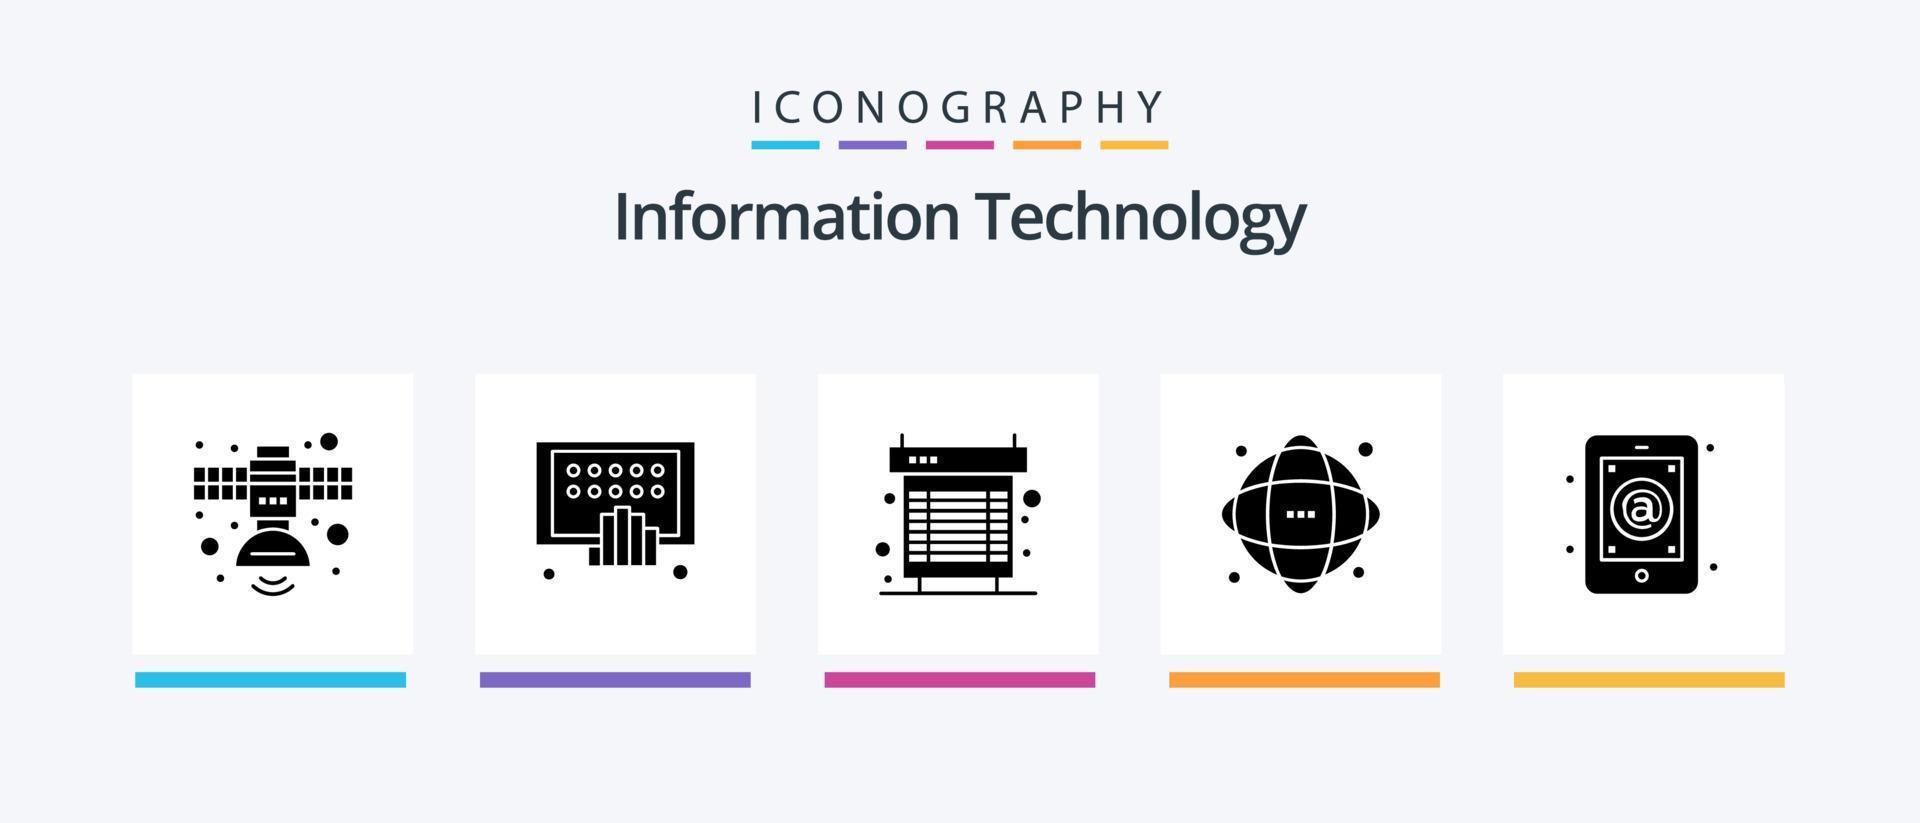 Information Technology Glyph 5 Icon Pack Including information. data. phone. system. fan. Creative Icons Design vector